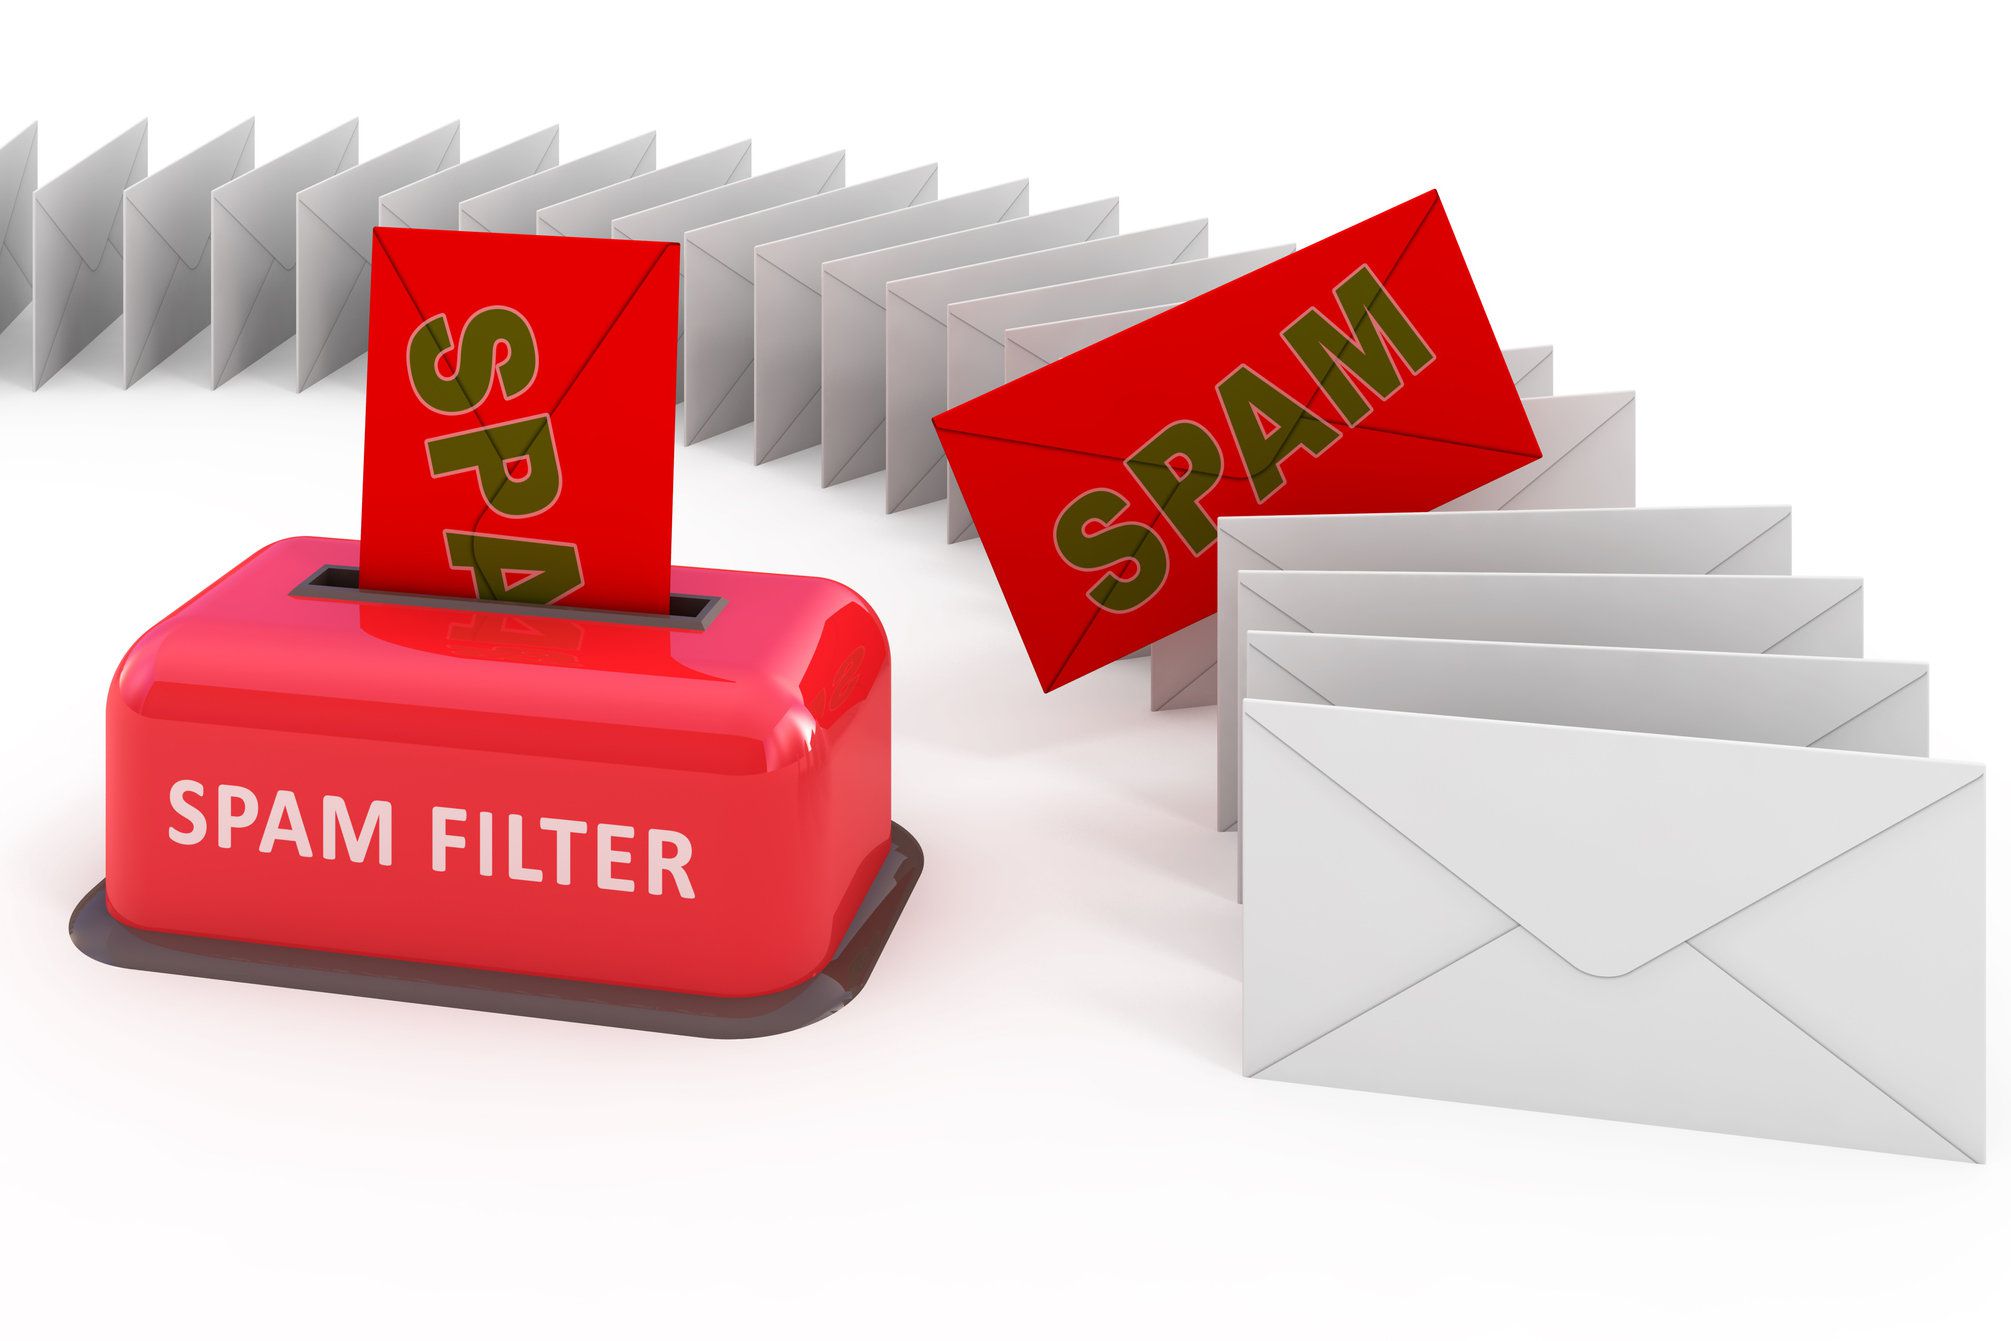 Increase your email open rates by reducing spam messages